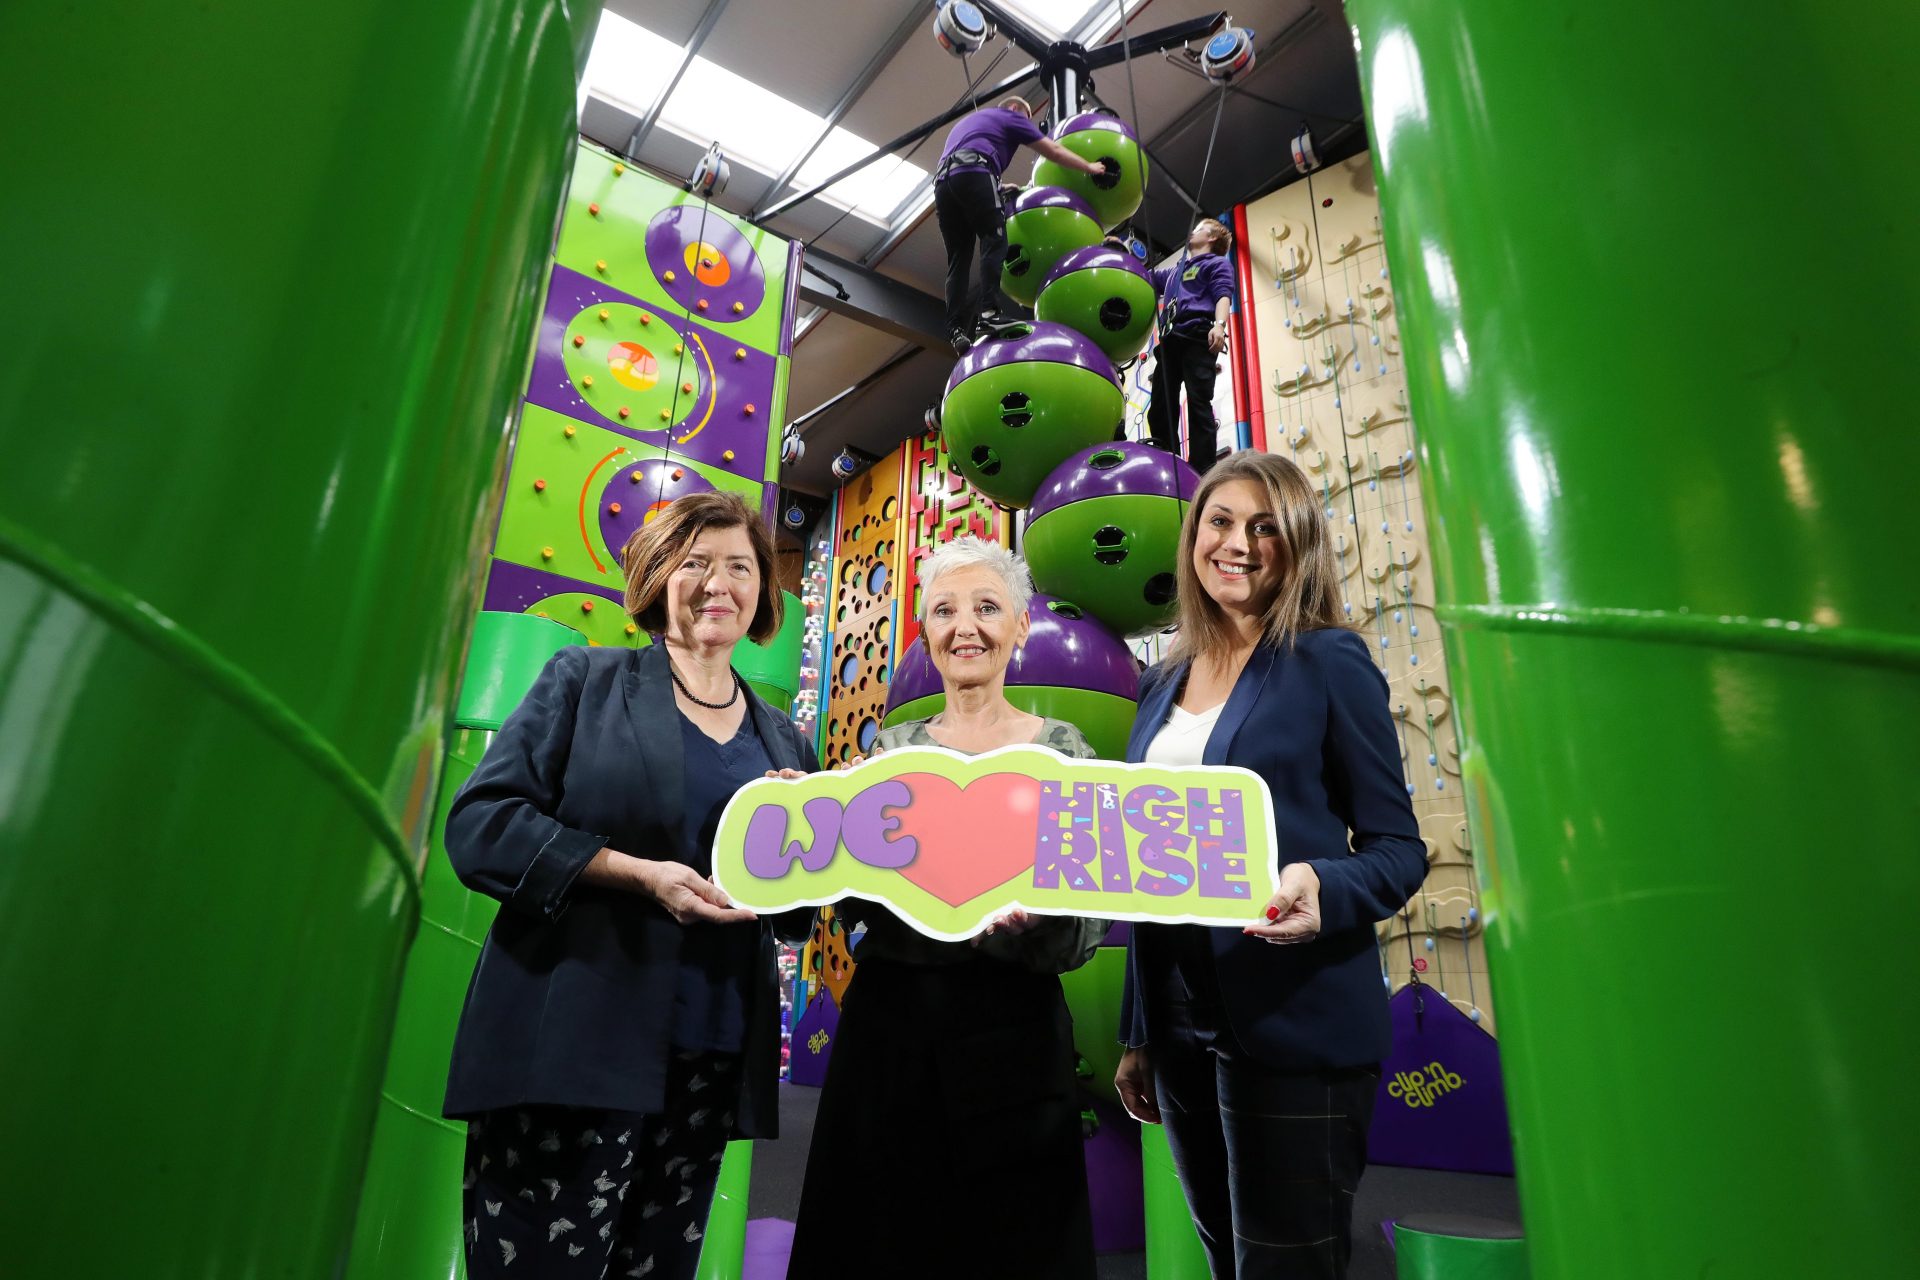 Press Eye - Belfast - Northern Ireland - 19th November 2019 - 

LISBURN SOCIAL ENTERPRISE INVESTS IN BRINGING FUN TO NEW HEIGHTS AT HIGH RISE 

Lisburn-based Social Enterprise Employers For Childcare is delighted to today (Tuesday 19 November) officially launch its £2.5 million indoor adventure centre High Rise at Altona Road, Lisburn. High Rise incorporates a stunning Clip Ôn Climb arena Ð the biggest in Ireland - along with a soft play area, Sensory Room and Quiet Room and a number of party and corporate rooms.  

Employers For ChildcareÕs Chief Executive, Marie Marin, centre, is pictured with local television and media personality Sarah Travers and Sue Gray, Permanent Secretary at the Department of Finance.

Photo by Kelvin Boyes / Press Eye.